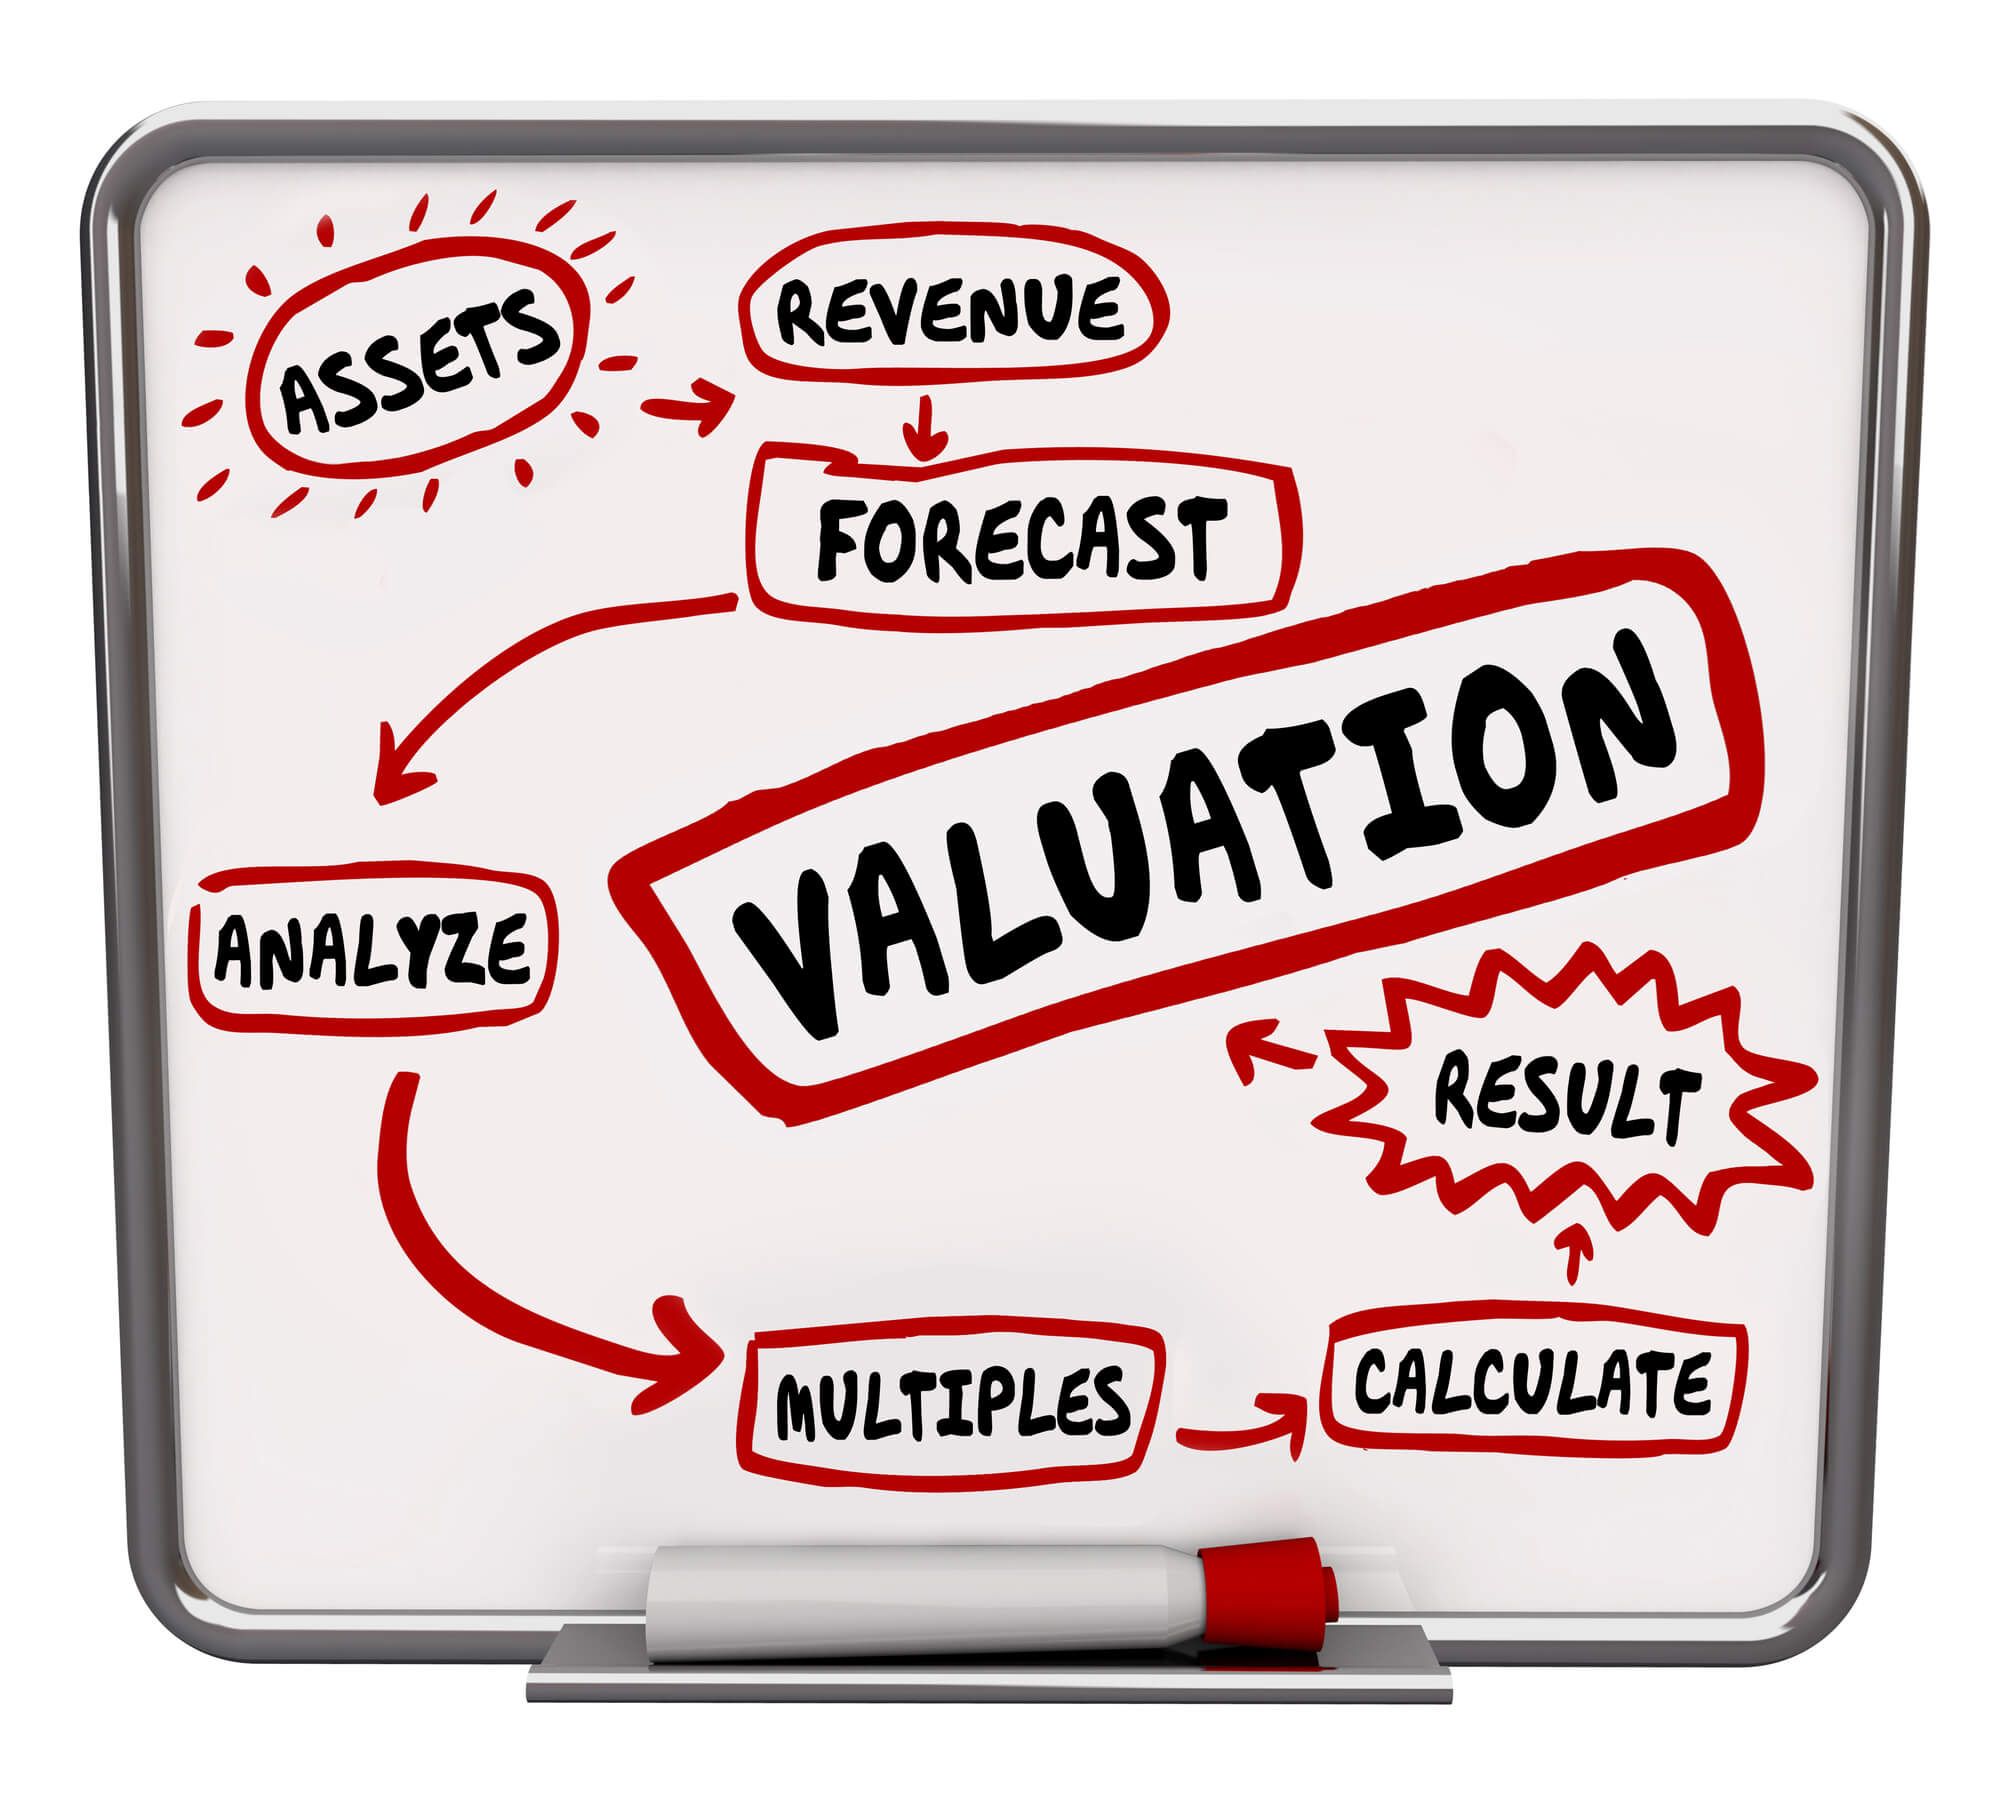 Valuation formula calculating company or business net worth or value to illustrate figuring assets, revenue and multiples in sale of organization - How to measure the value of your website and increase it with thoughtful design and images - Image